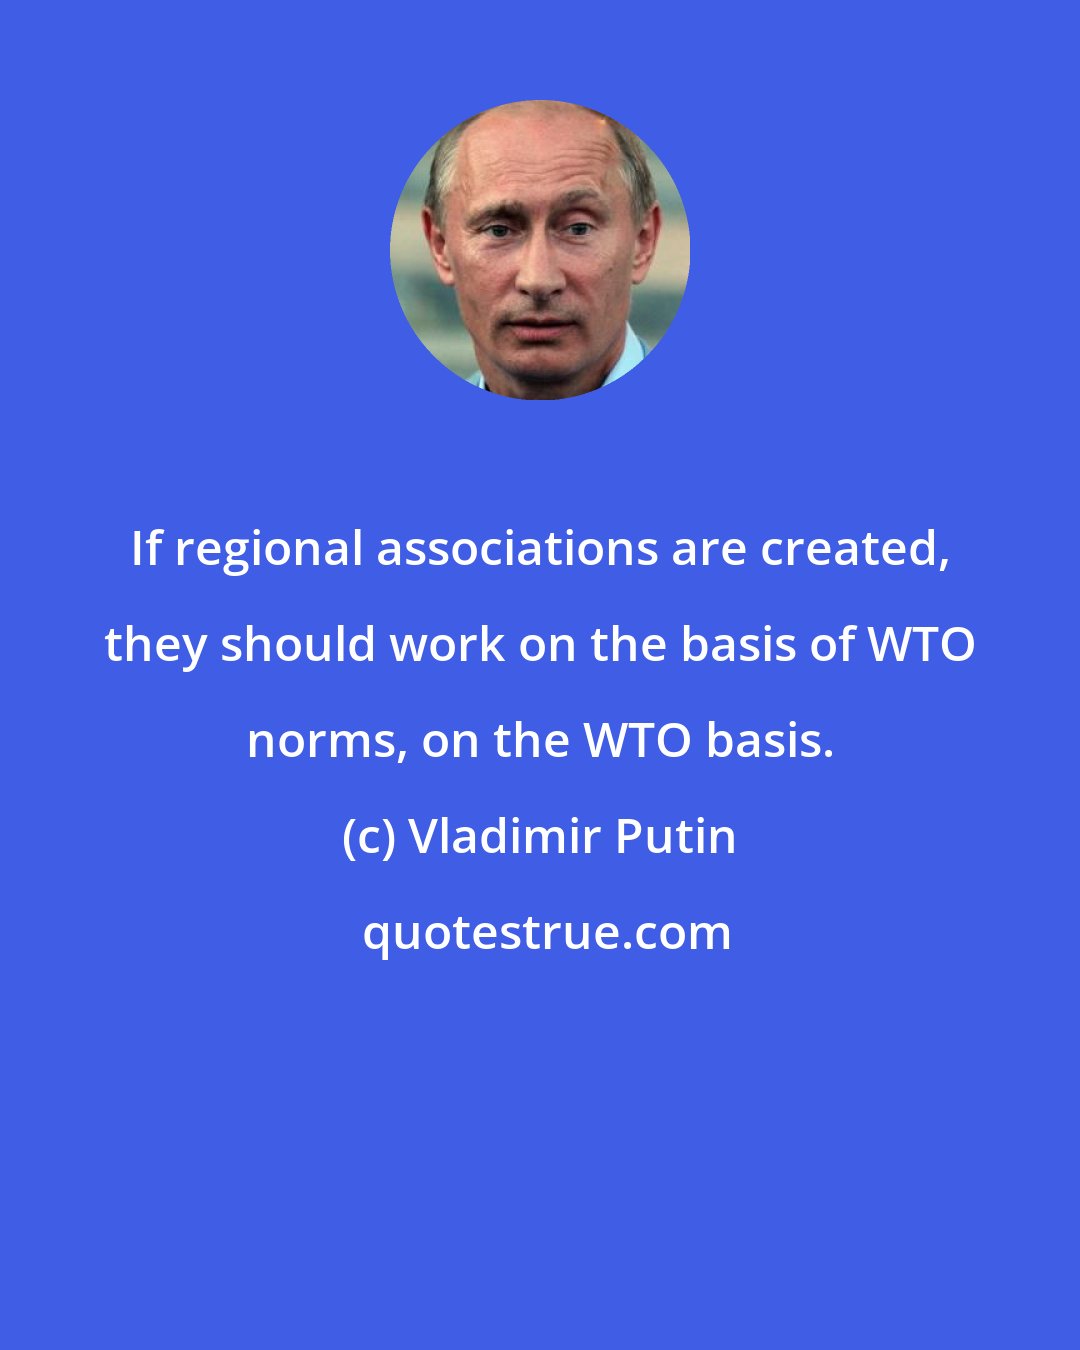 Vladimir Putin: If regional associations are created, they should work on the basis of WTO norms, on the WTO basis.